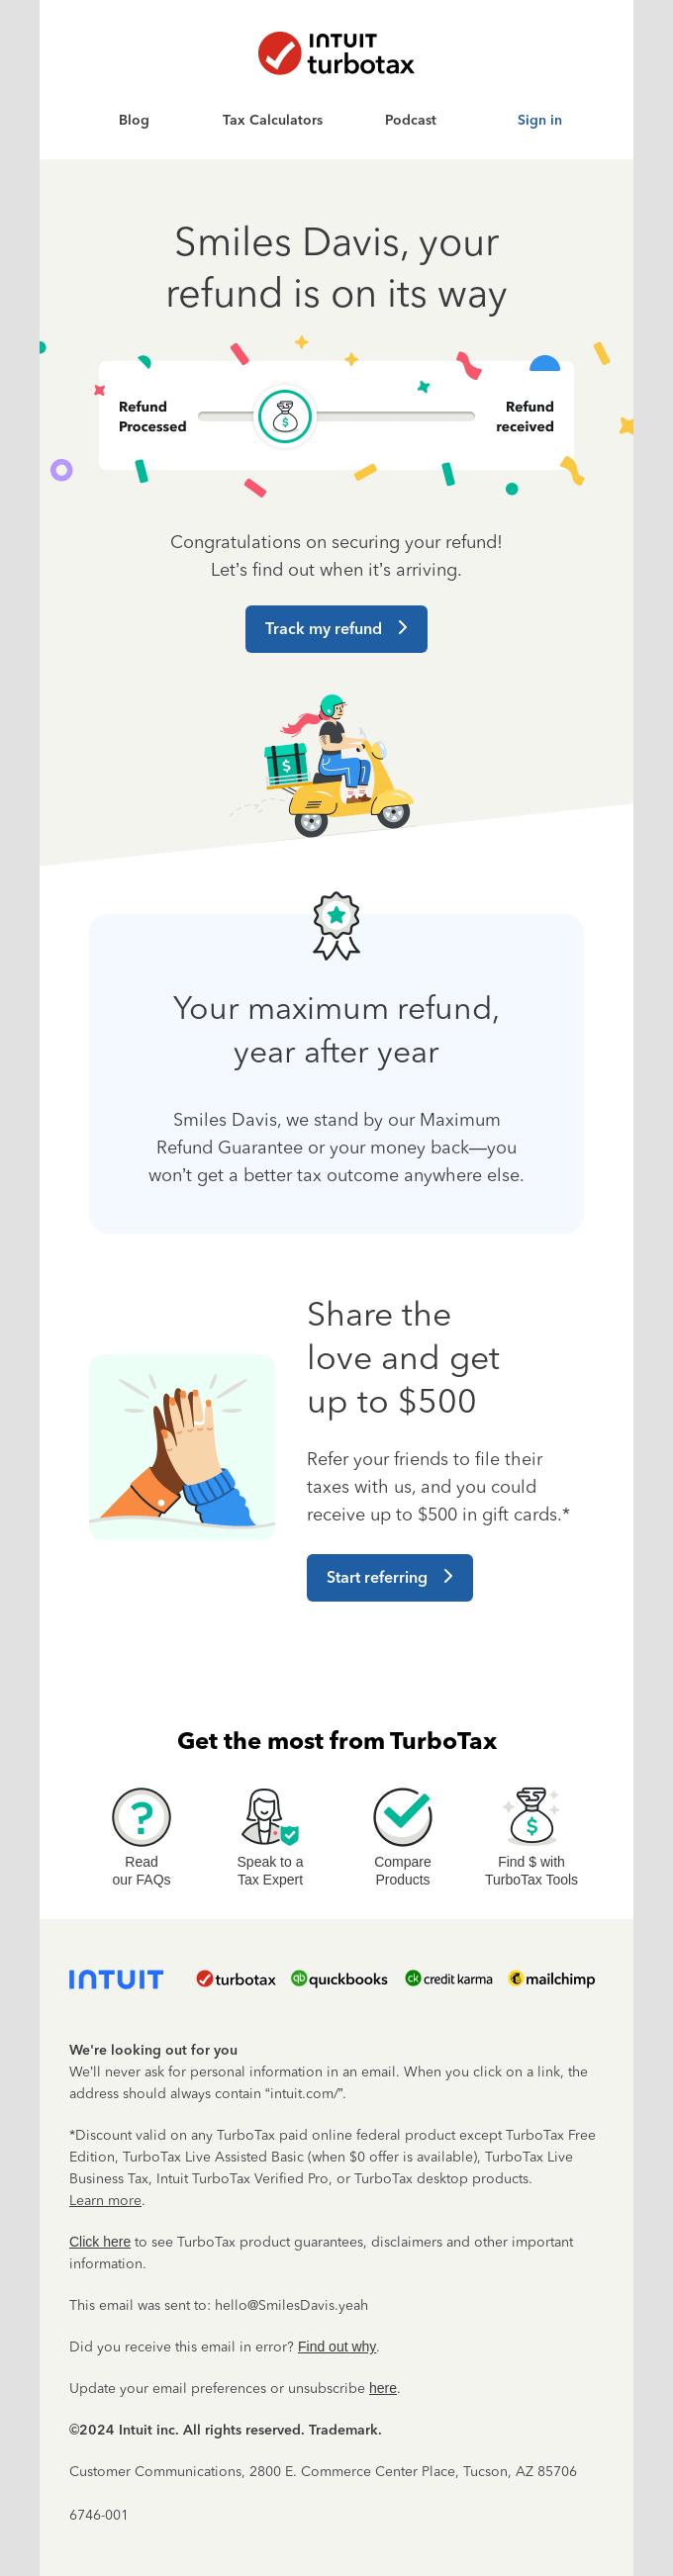 Smiles Davis, your refund is coming—track it now